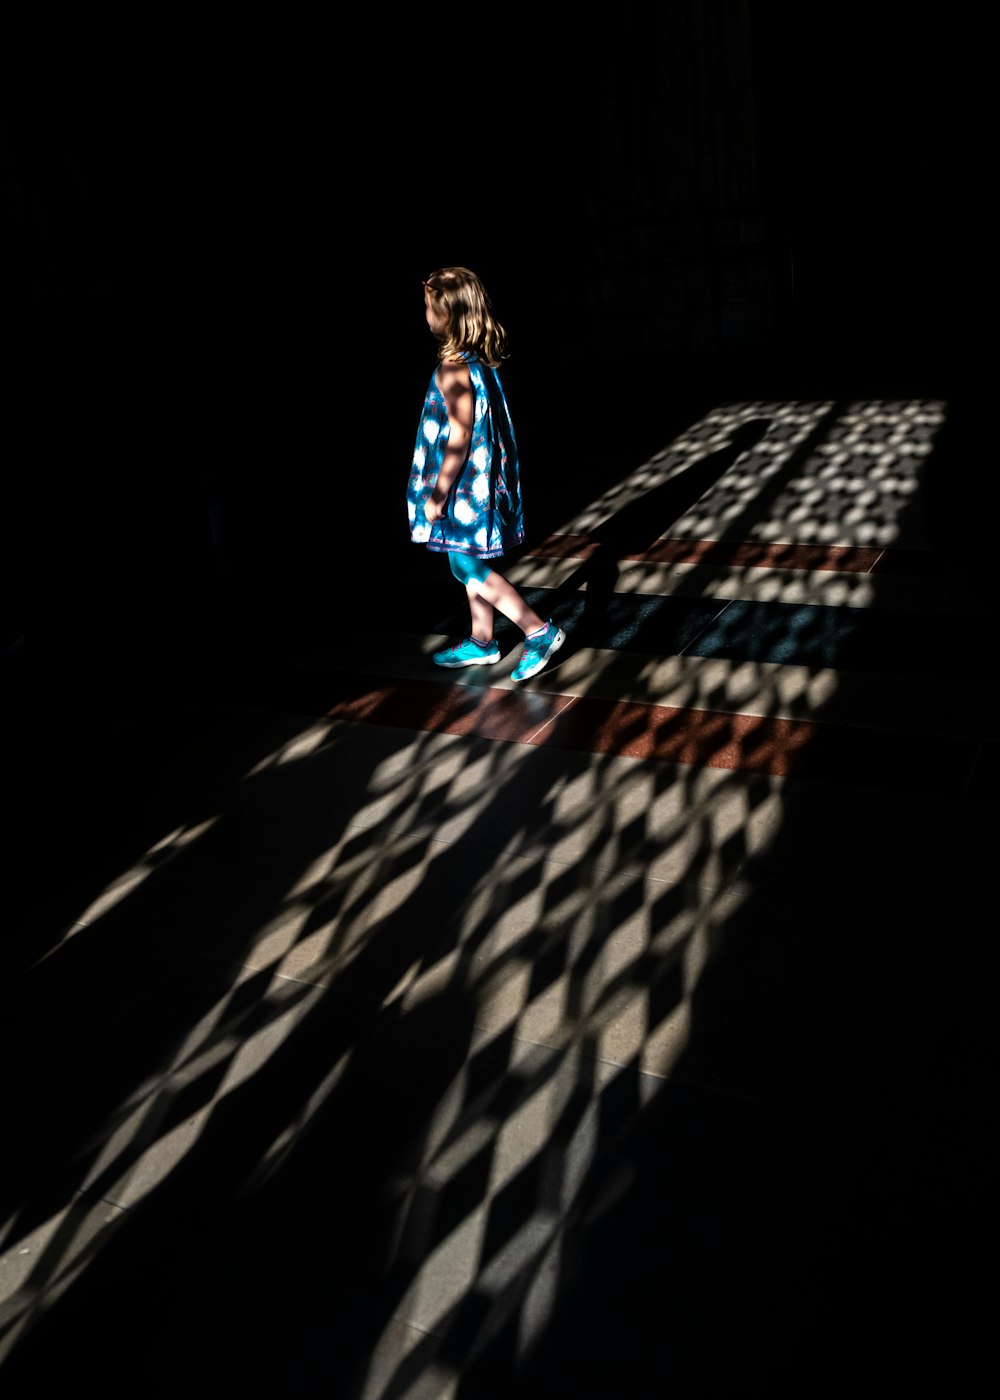 woman in blue and white dress walking on black and white checkered floor